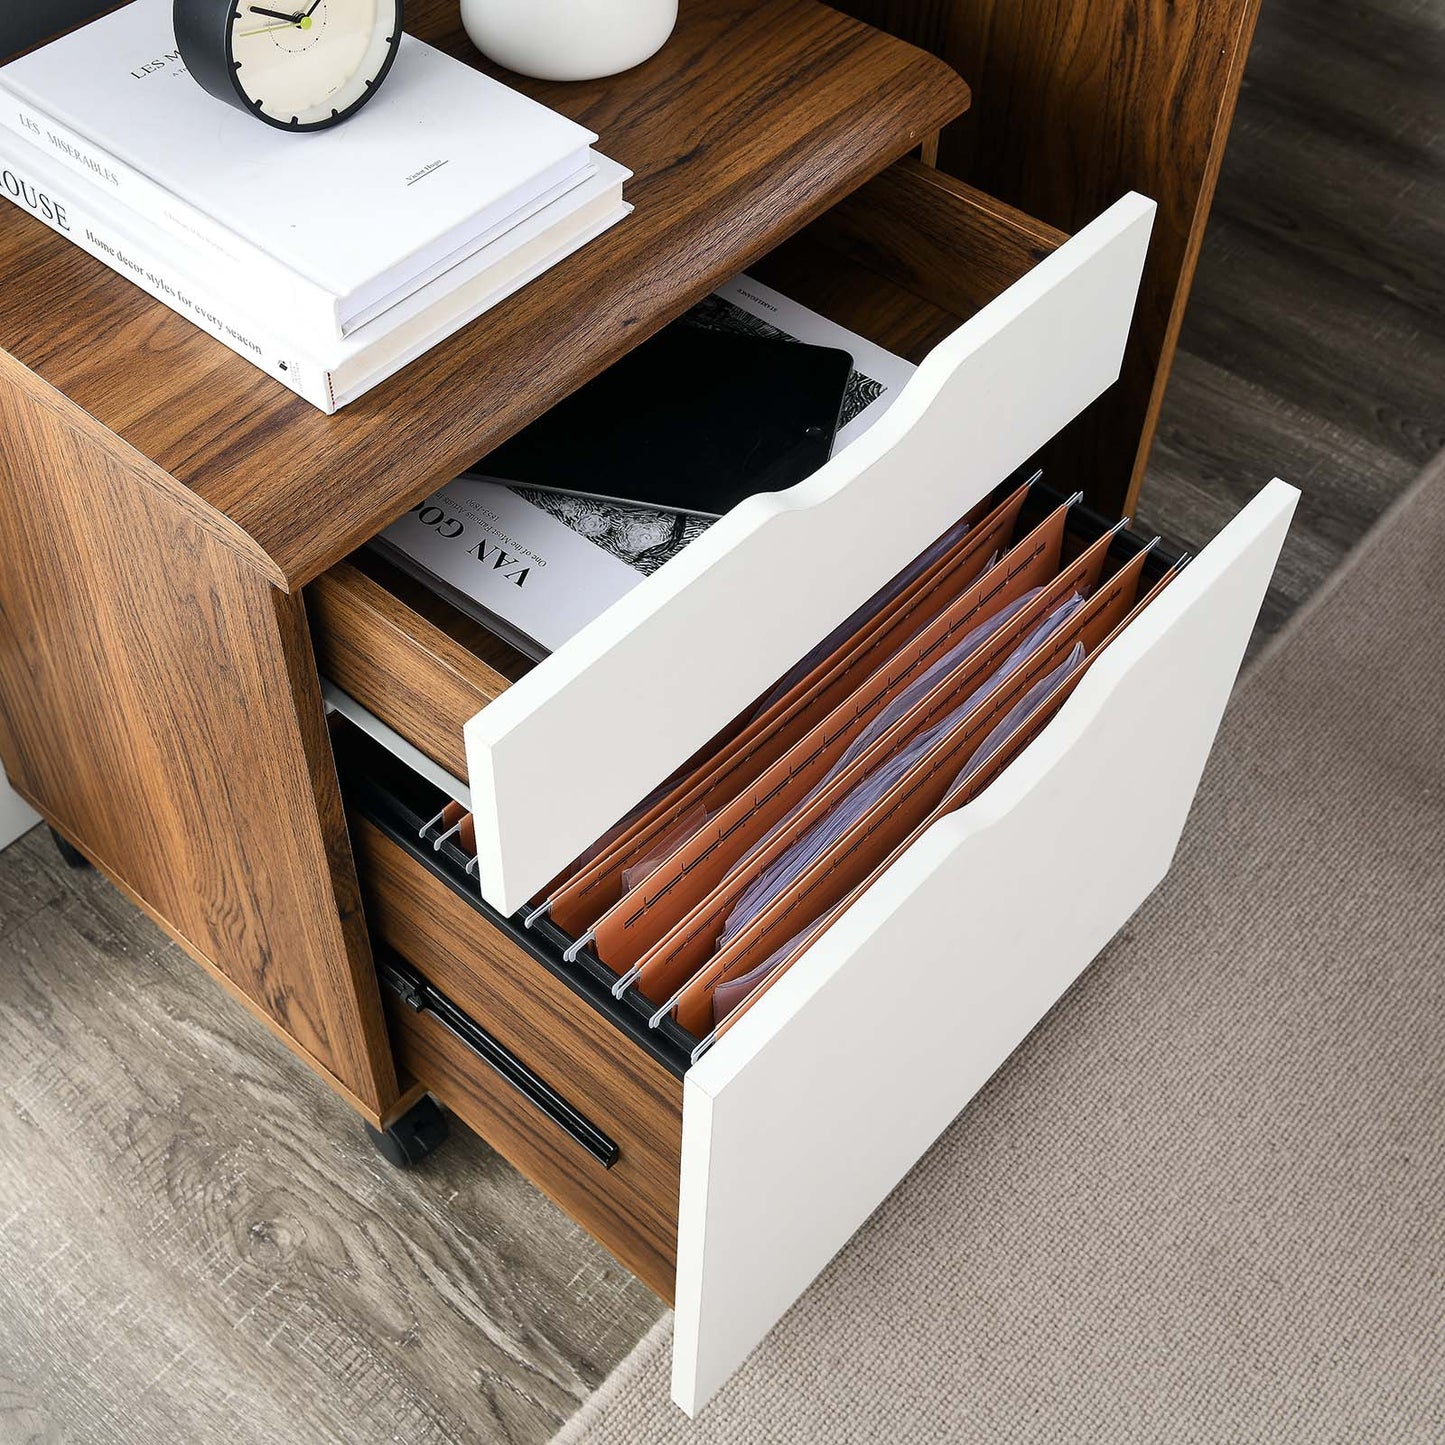 Envision Wood File Cabinet Walnut White EEI-5706-WAL-WHI